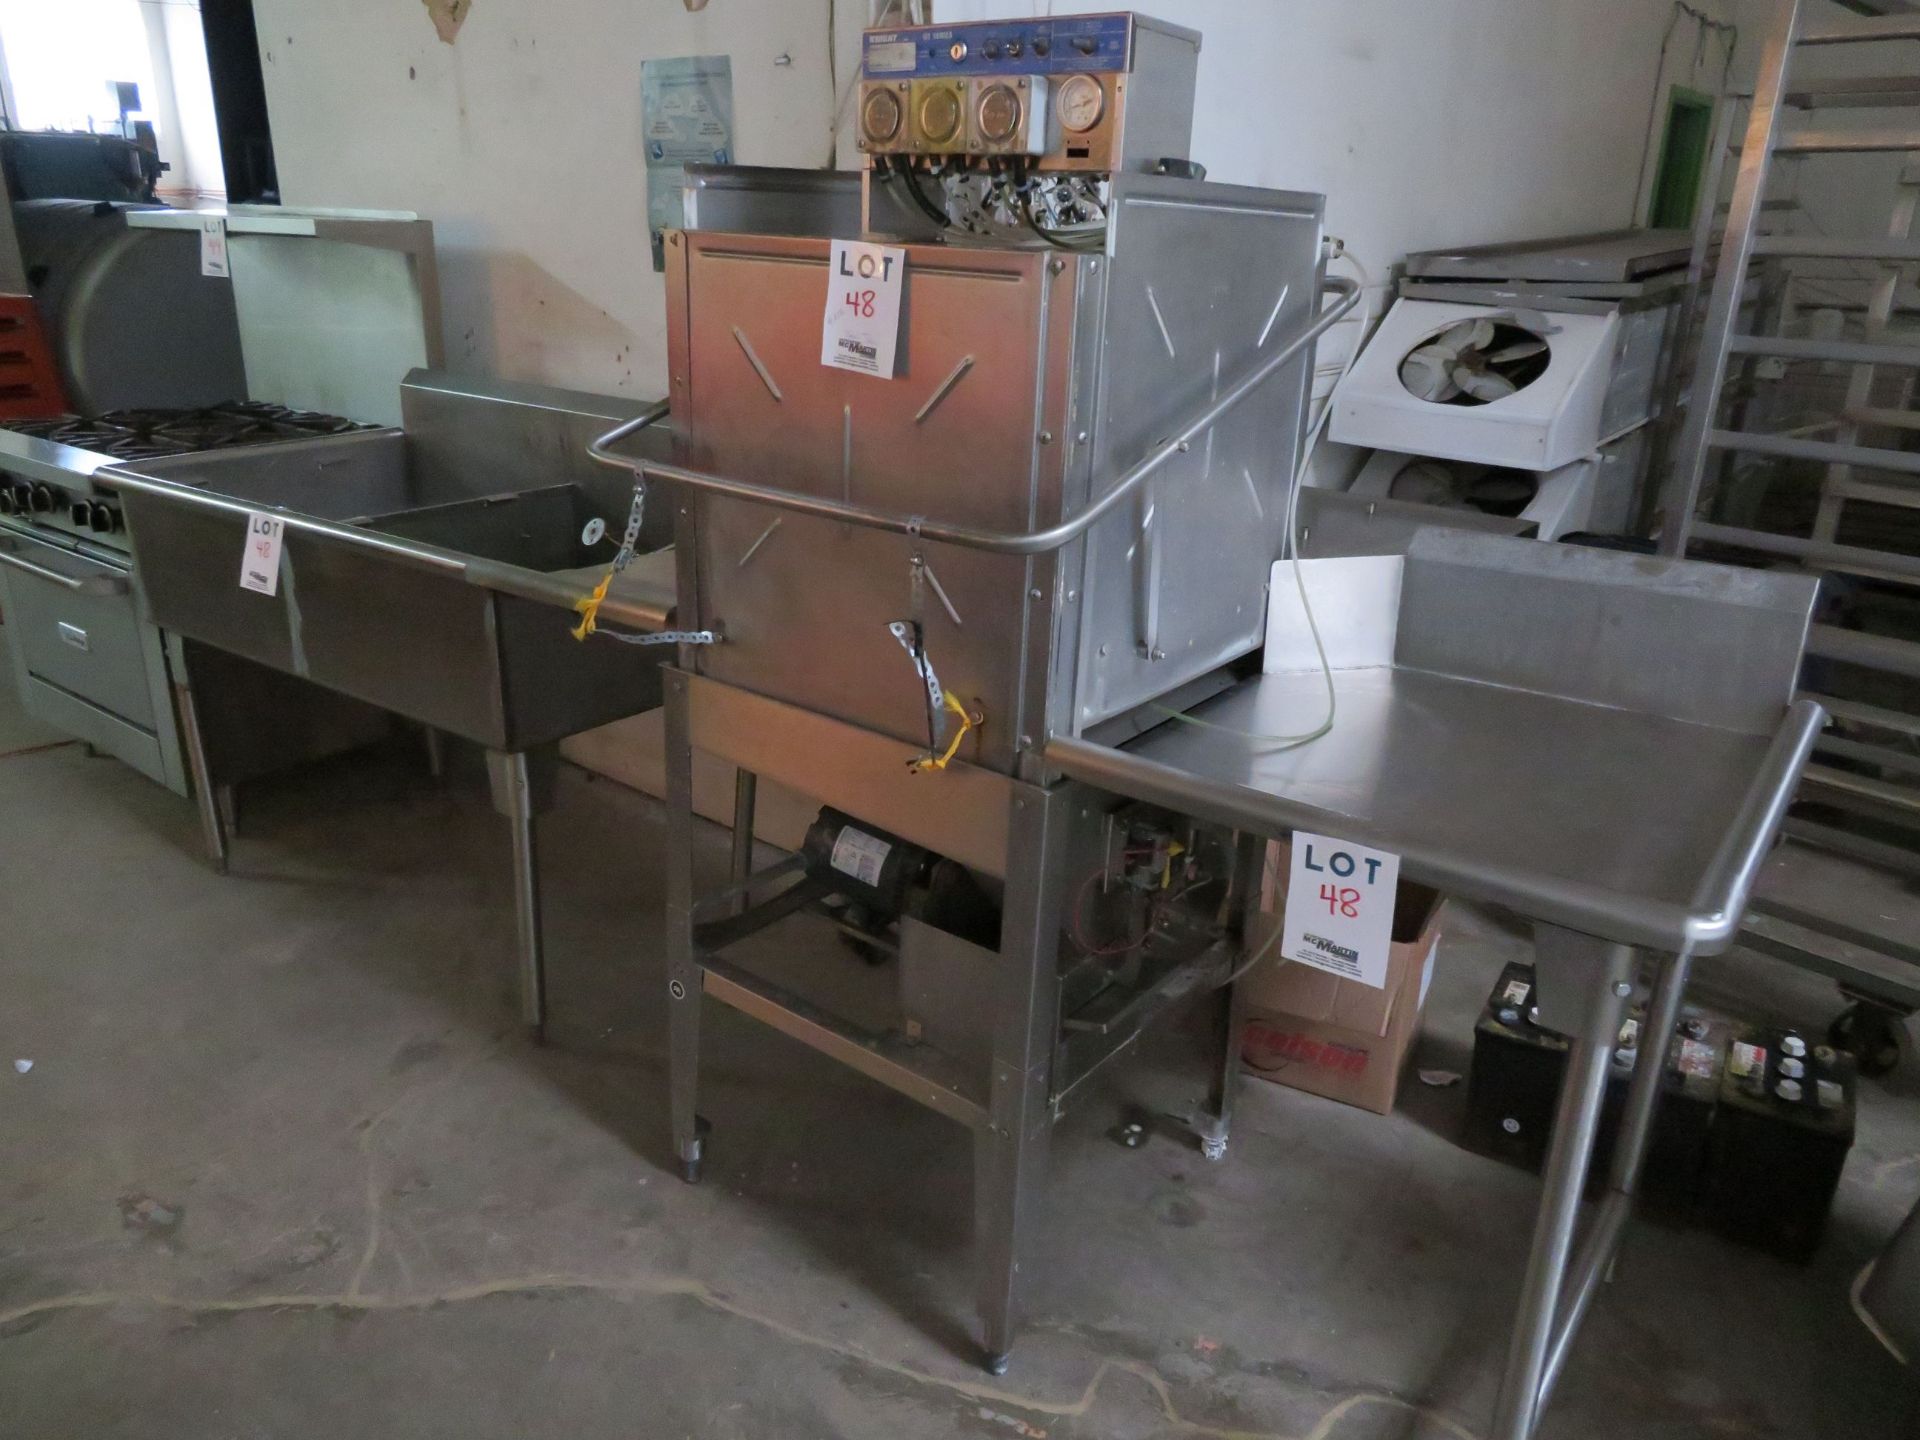 LOT including complete unit with KNIGHT GT SERIES commercial dishwasher comes with double sink